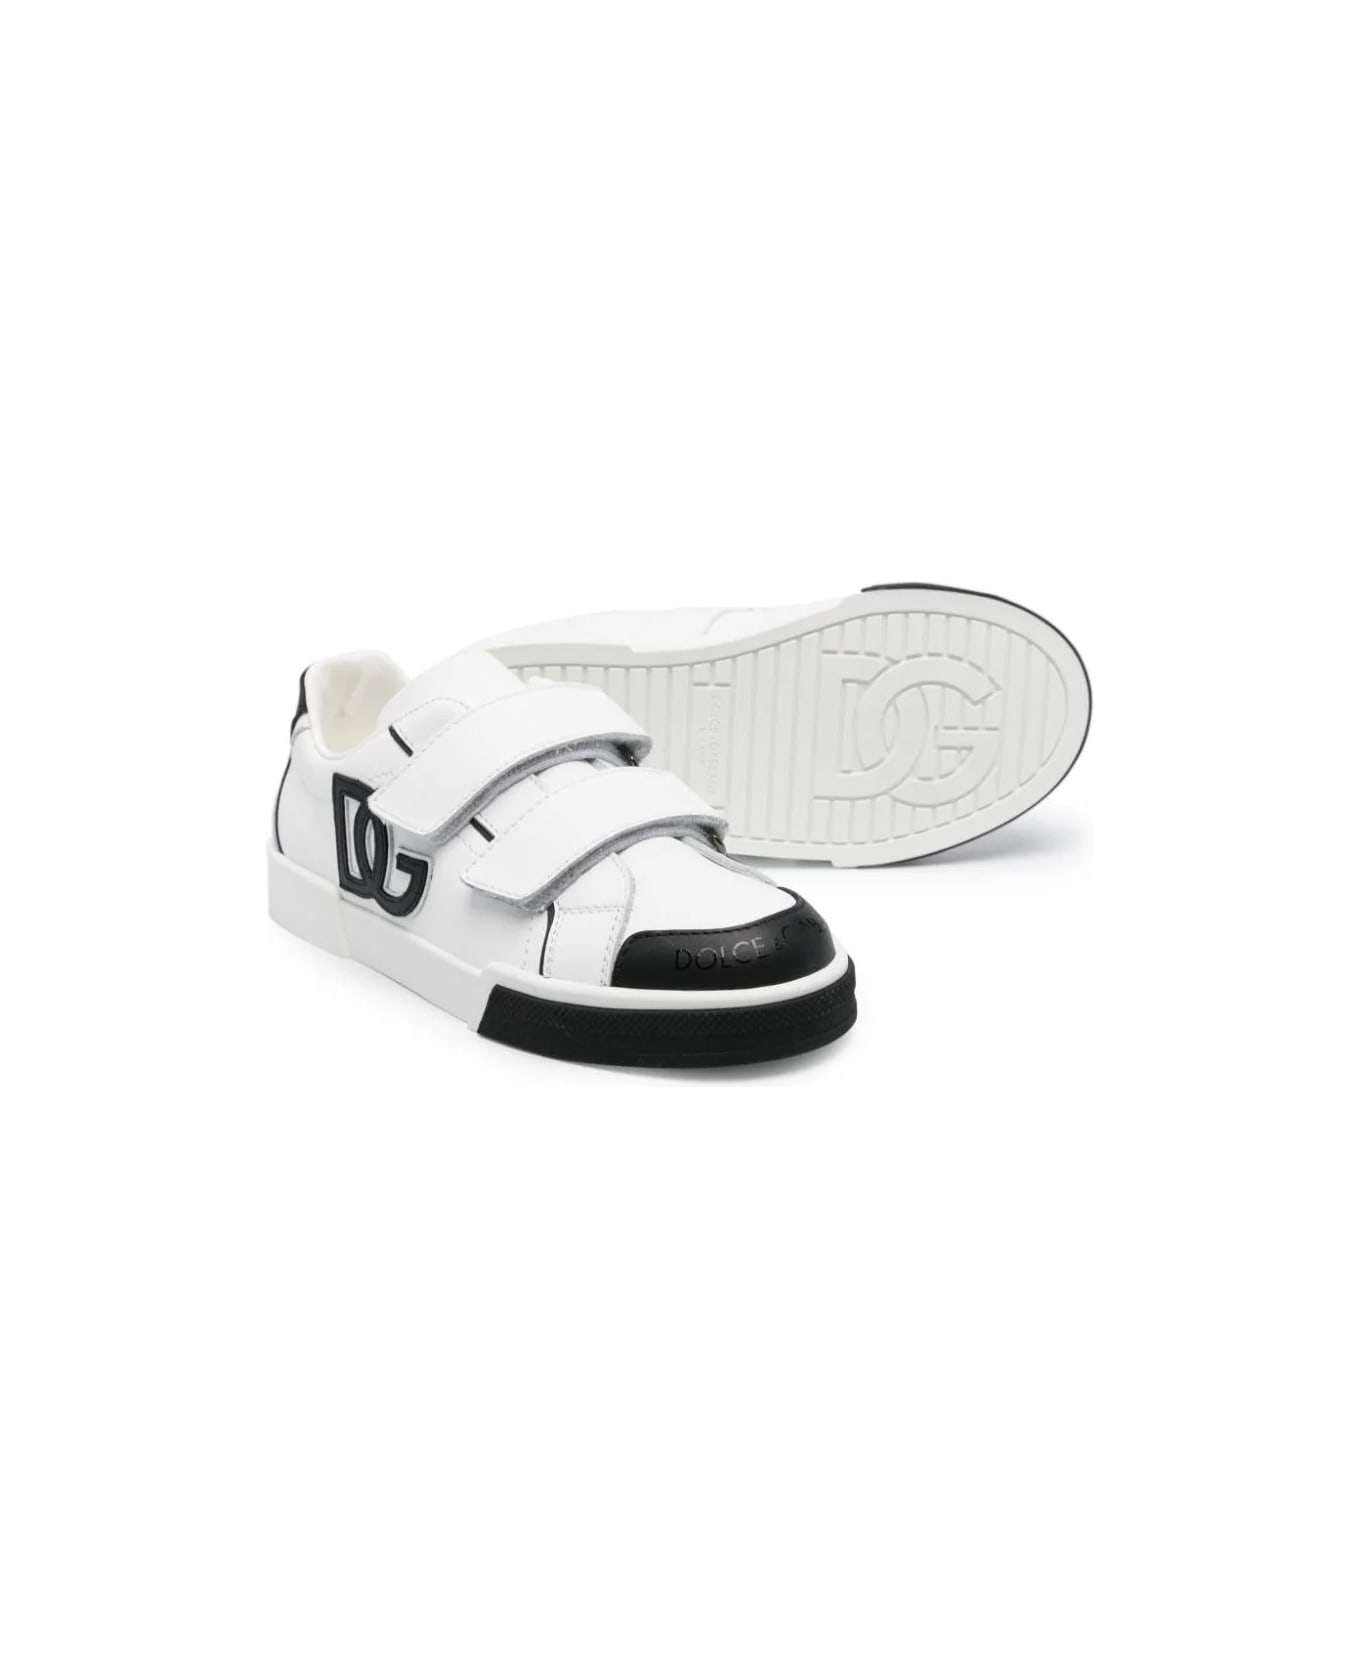 Dolce & Gabbana White And Black Sneakers With Dg Logo - White